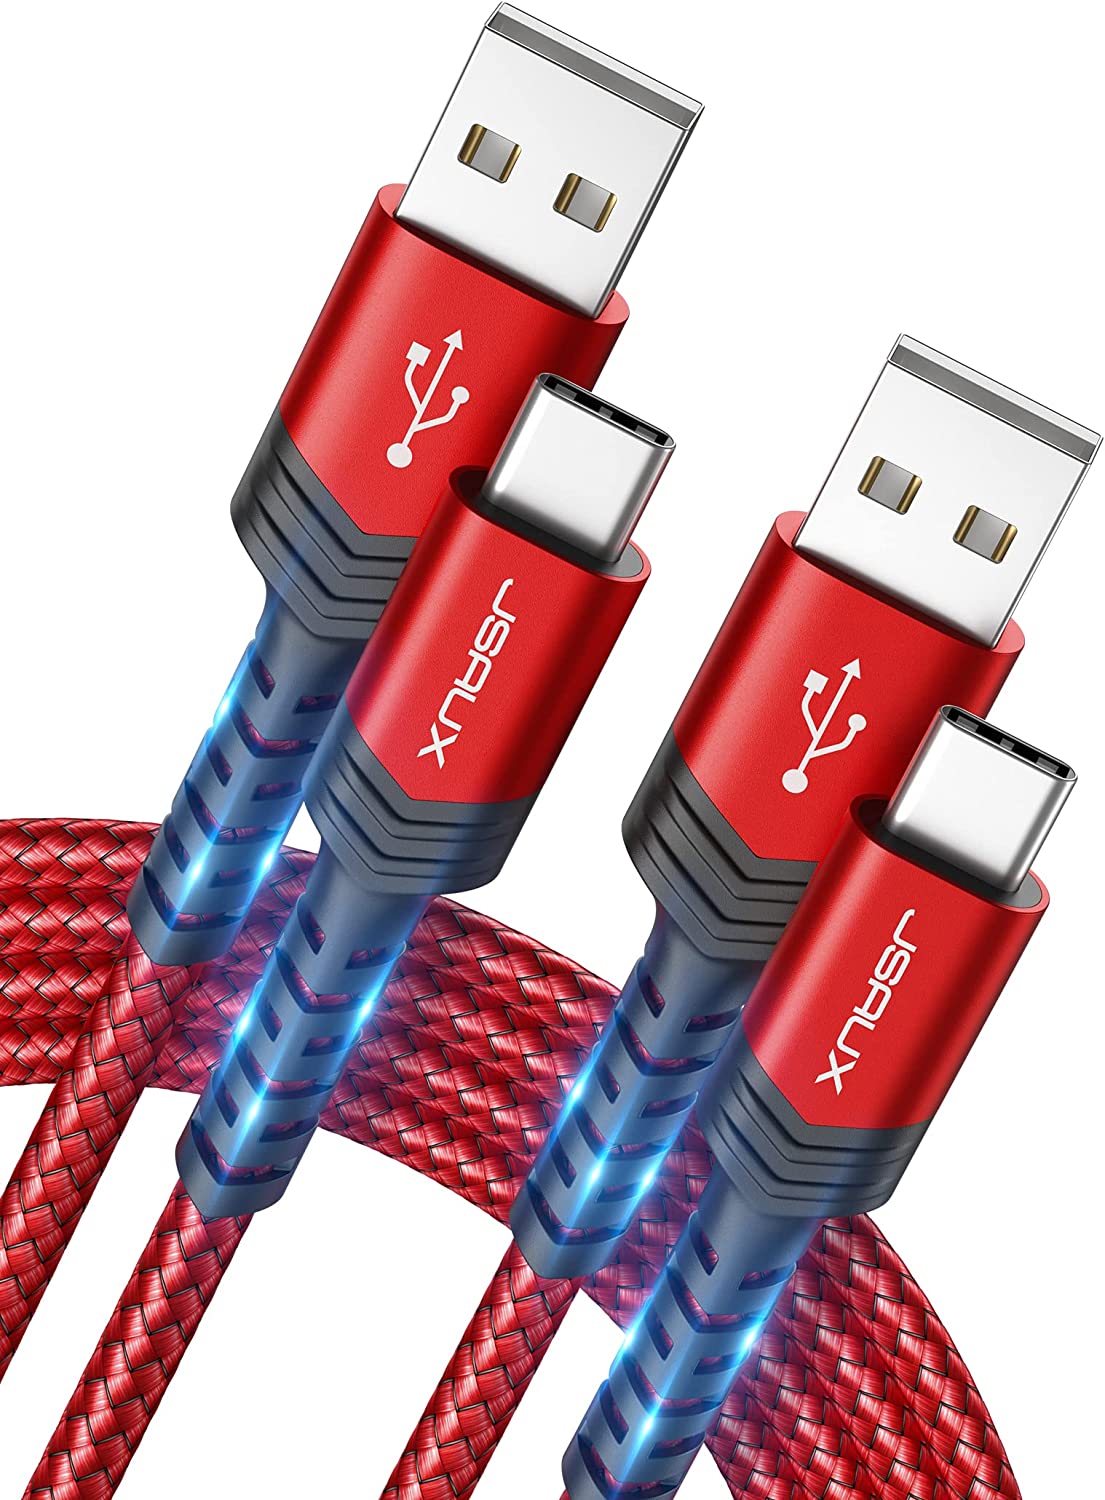 JSAUX USB-C to USB A Cable 3.1A Fast Charging [2-Pack [...]